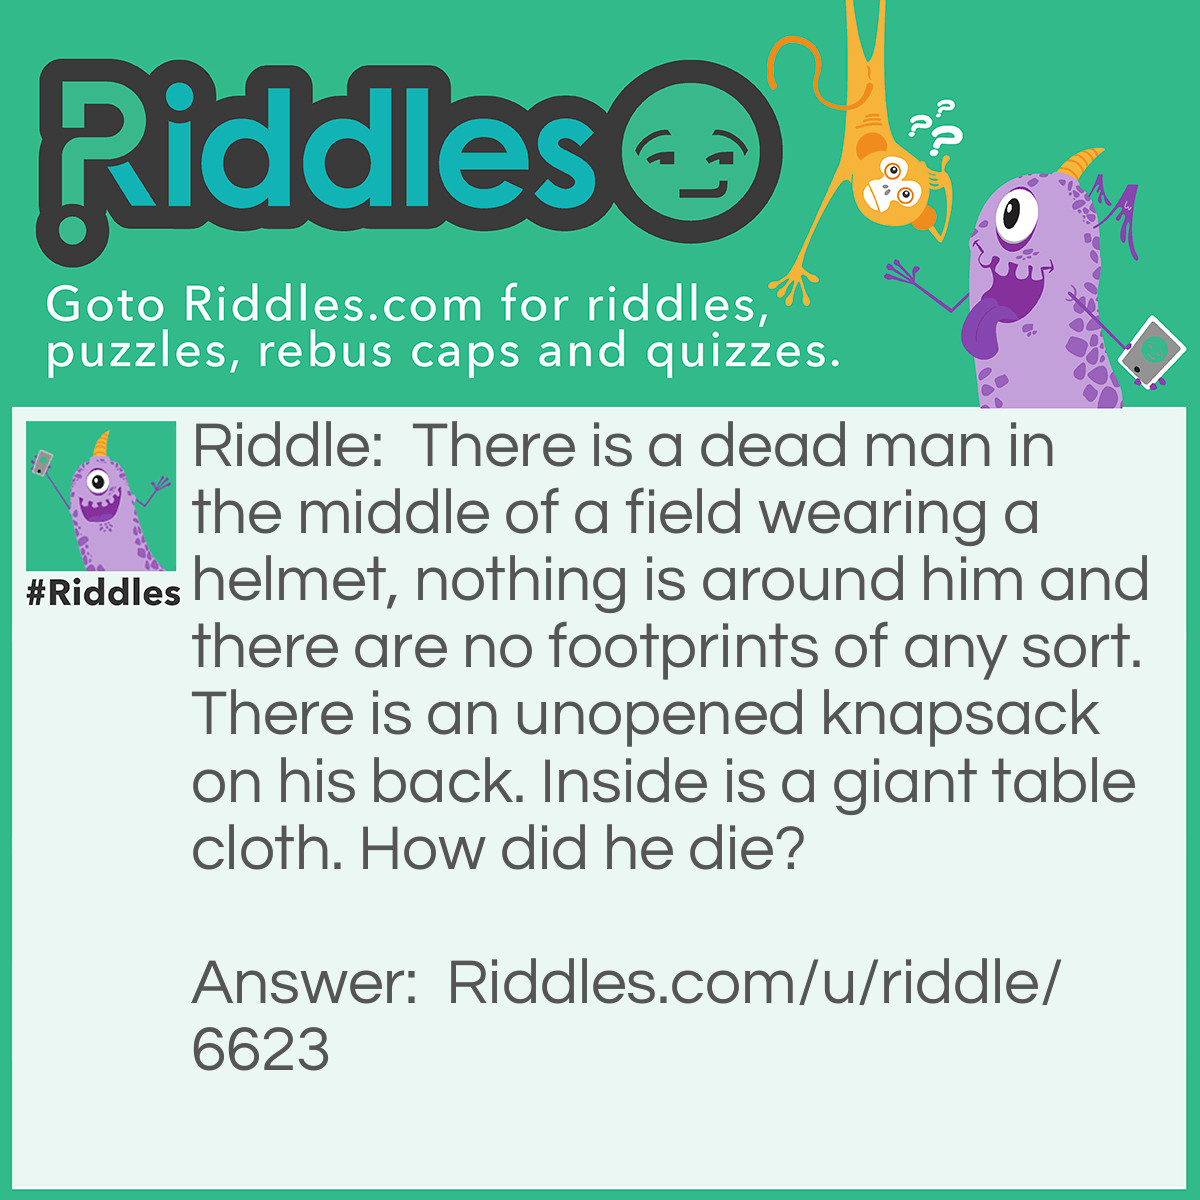 Riddle: There is a dead man in the middle of a field wearing a helmet, nothing is around him and there are no footprints of any sort. There is an unopened knapsack on his back. Inside is a giant table cloth. How did he die? Answer: Parachute failure.